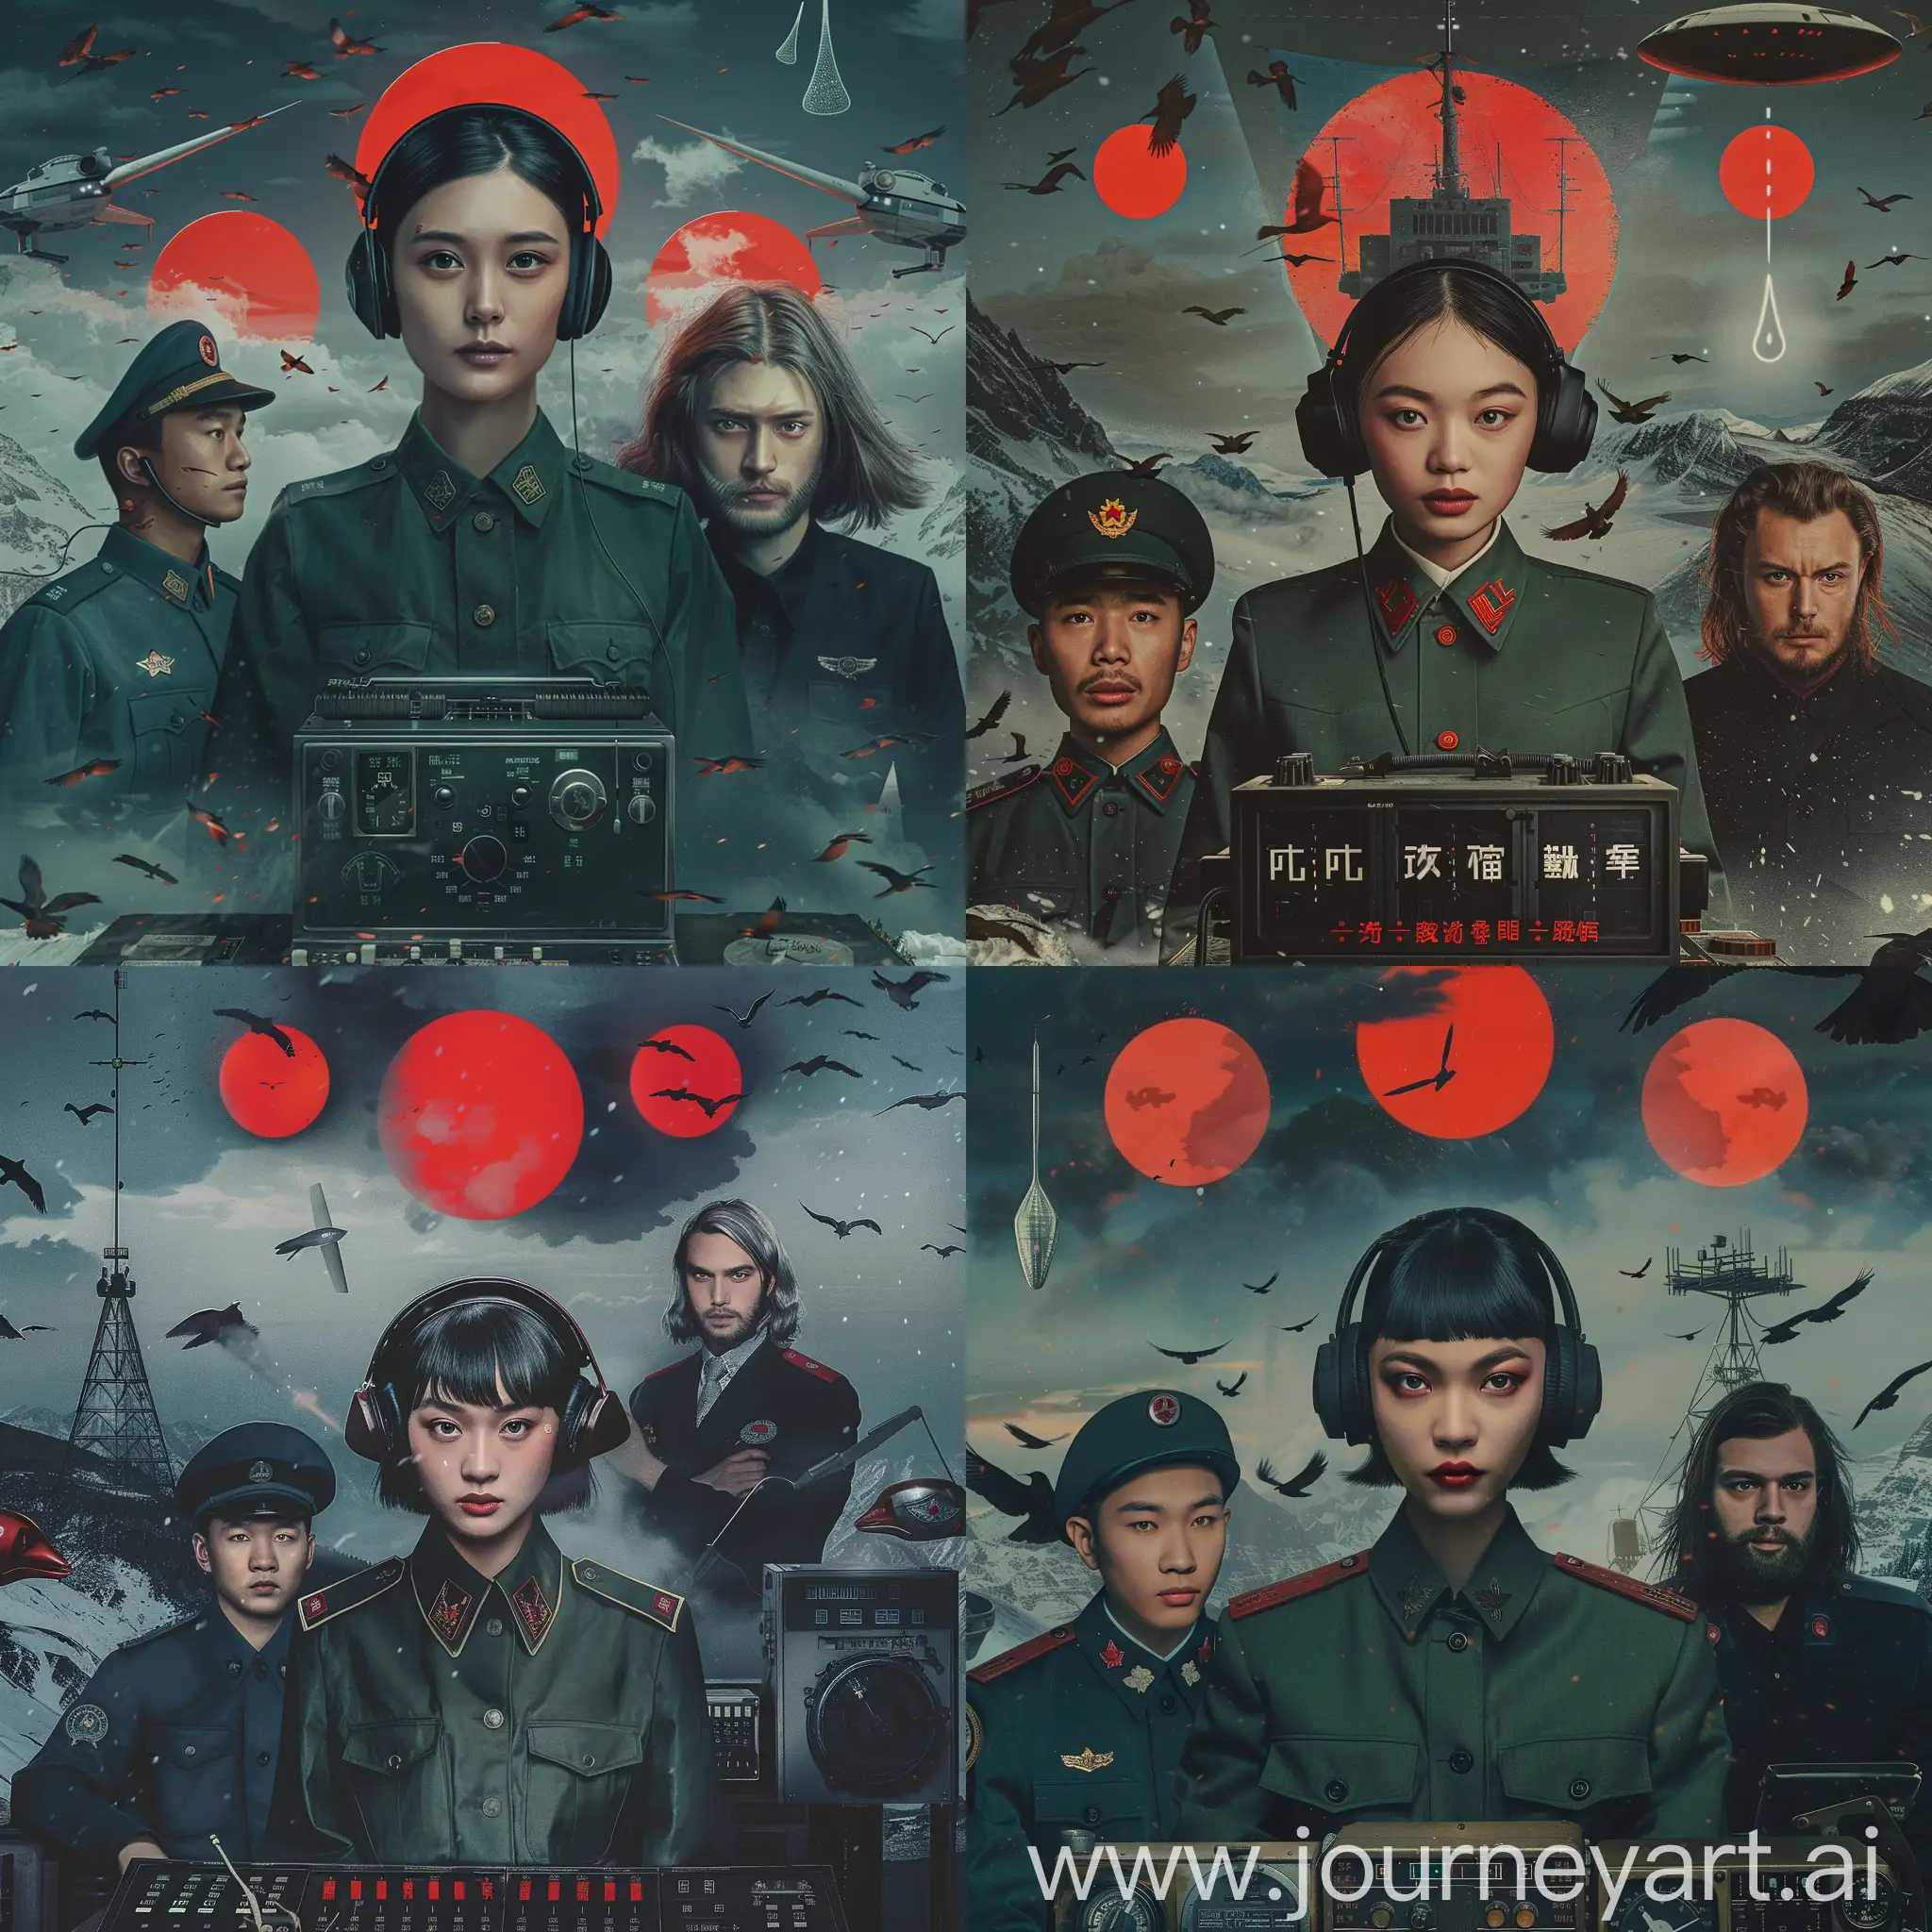 movie poster style,

at the middle, a close-up portrait of a mid-short black hair elegant pretty Chinese lady, she dresses like a Maoist Red guard, with deep green maoist military uniform, 

she has big black headphones on her ears, she sits before a control panel on which there is an old steel radio, 

at left next to her, there is a small half-length portrait of an handsome young Chinese soldier in deep blue maoist hat and uniform,

at right next to her, there is another half-length portrait of a serious blond American young scientist with long hairs and beards, he wears black suit, without hat,

three giant red suns in the middle of the dark sky, the birds are falling down, a sliver raindrop style UFO flys towards the left,

in the background, there is a military outpost of giant steel long-range radar antenna, on the top of a snow mountain,